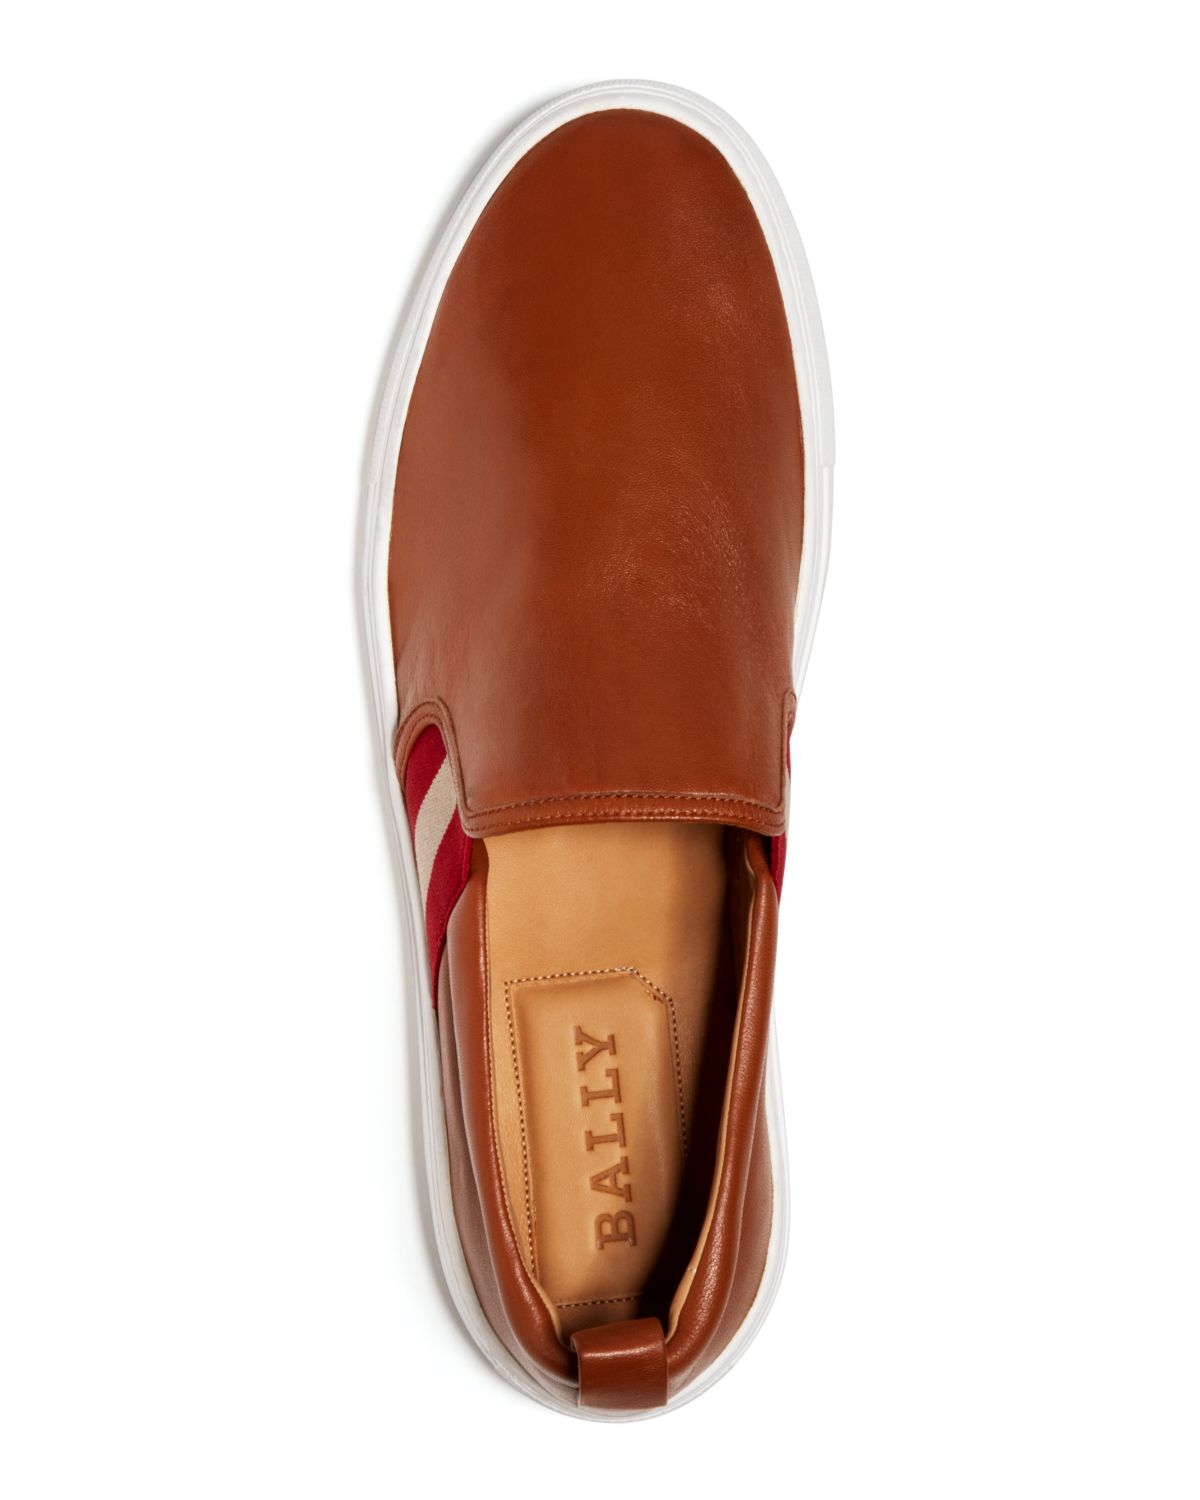 Bally Leather Slip On Sneakers in Tan (Brown) - Lyst